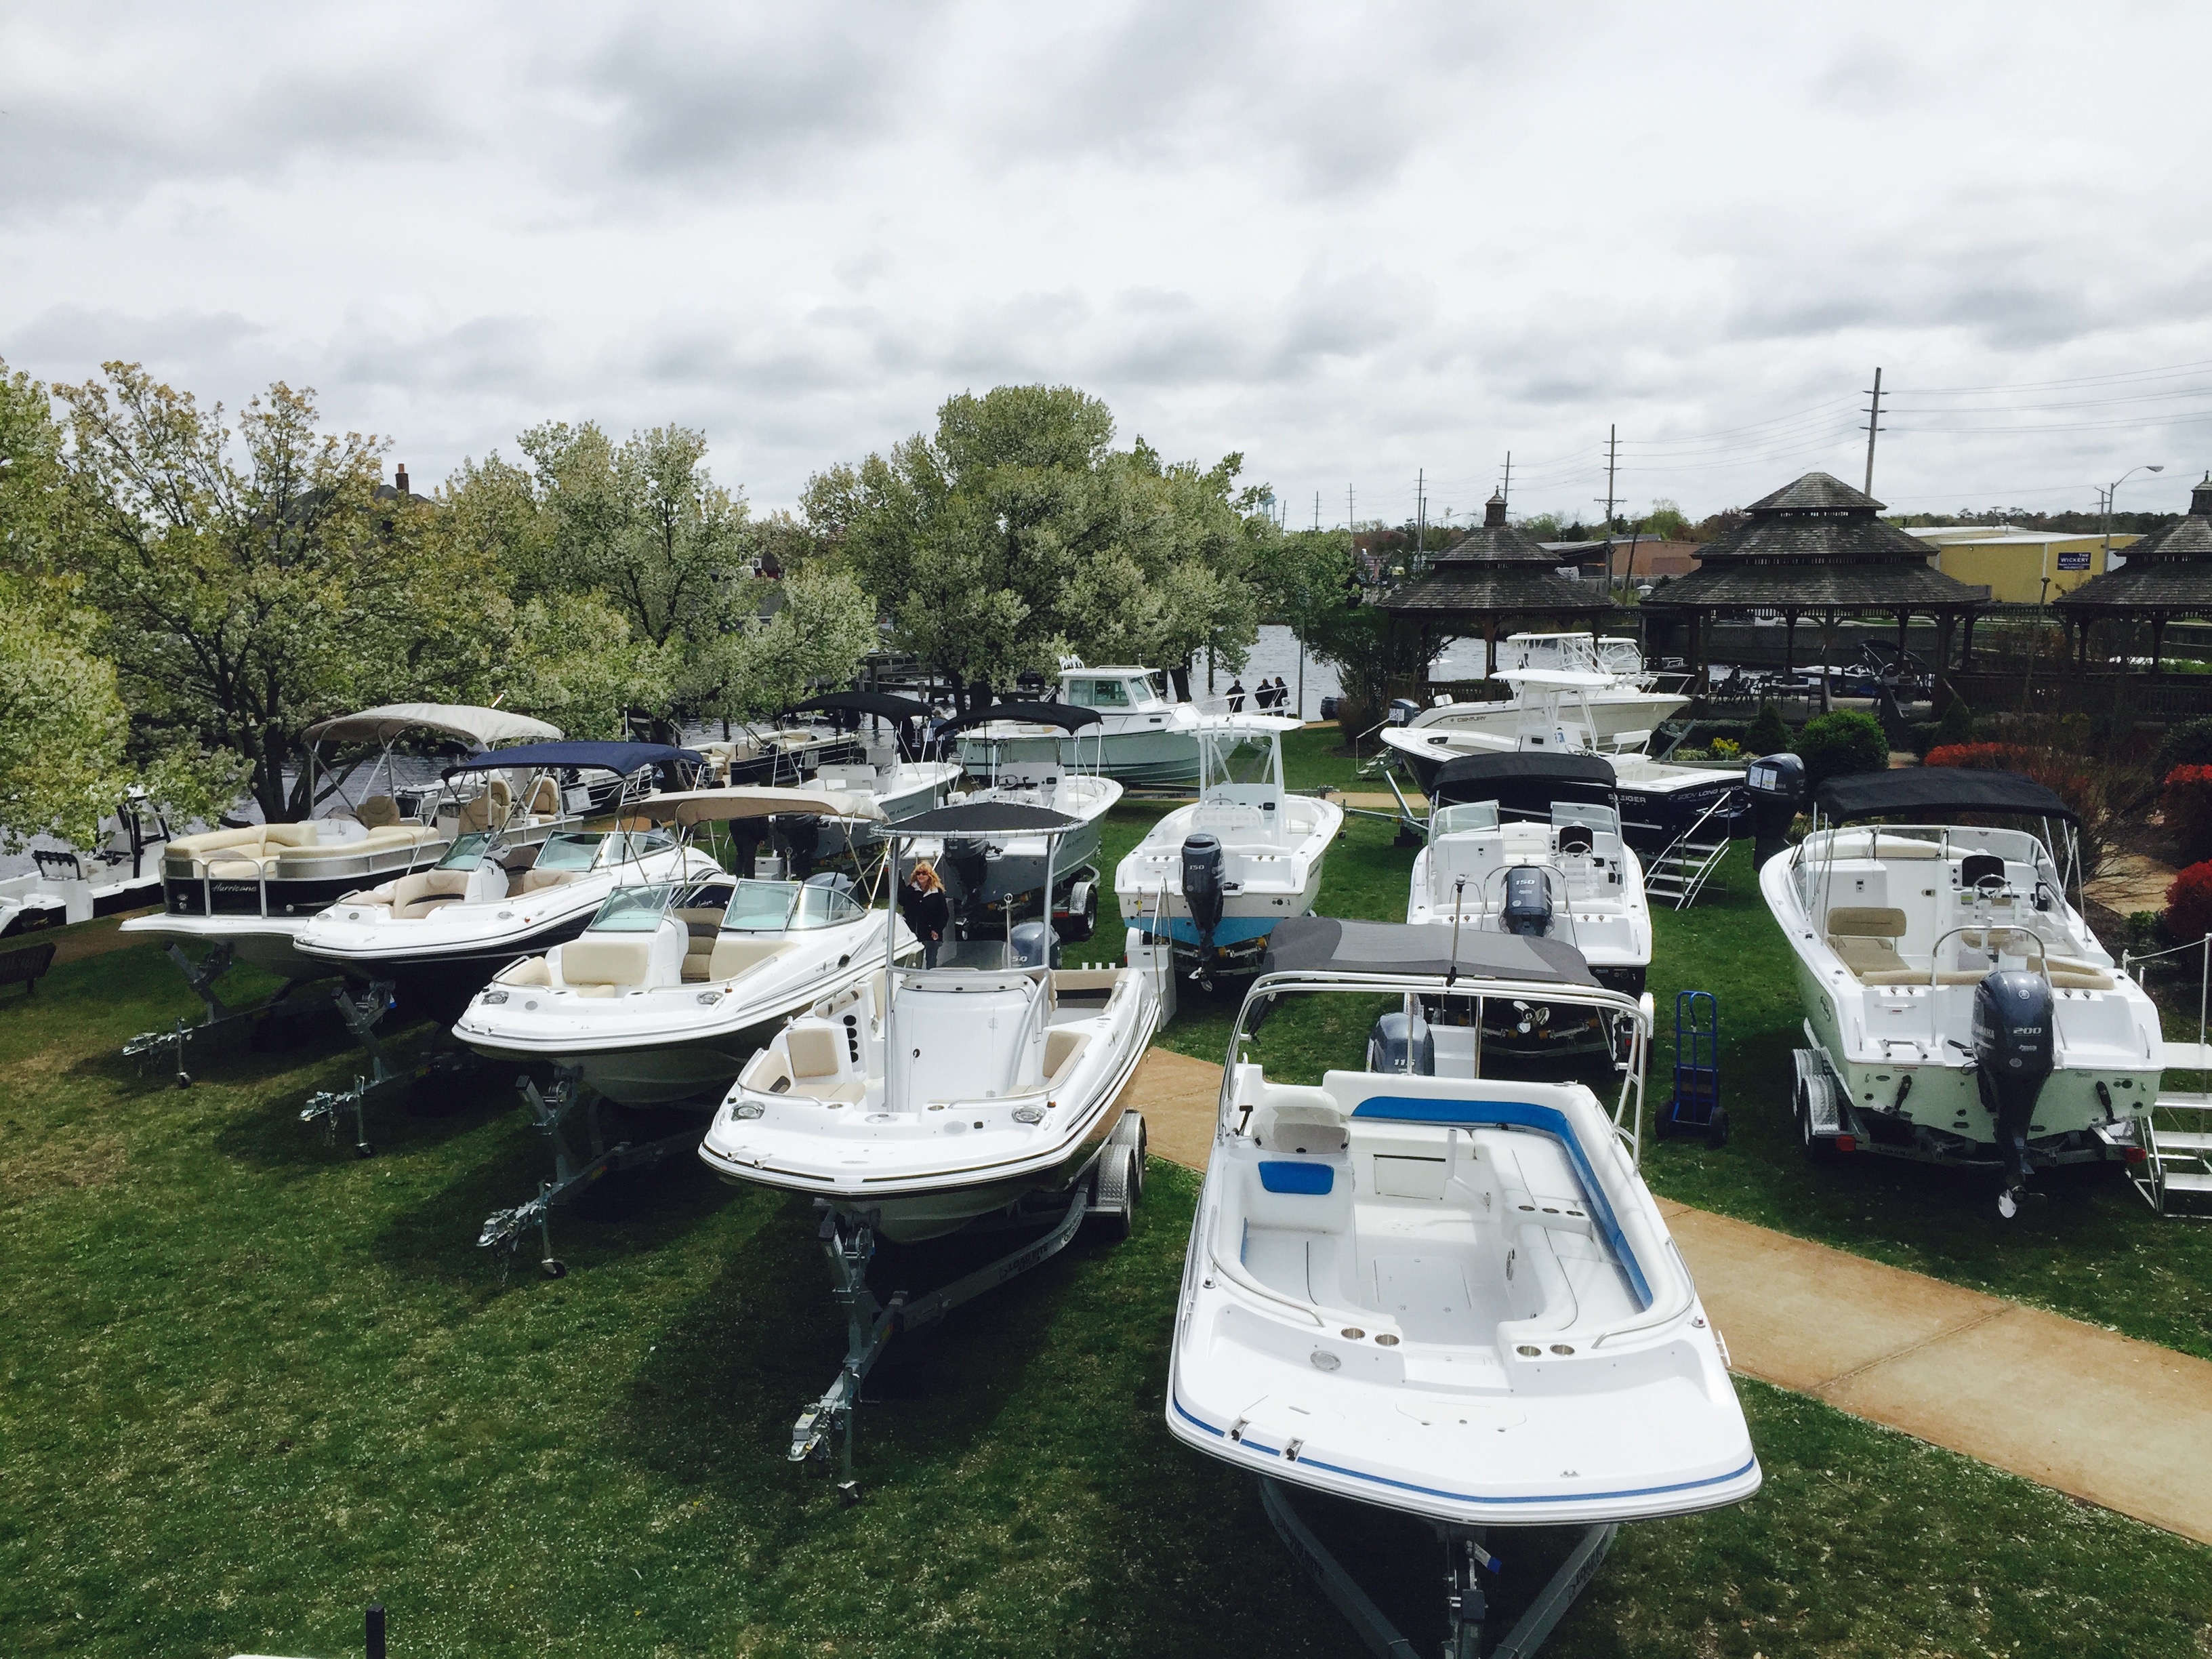 View from Hight up at the 5th annual spring huddy park in water boat show